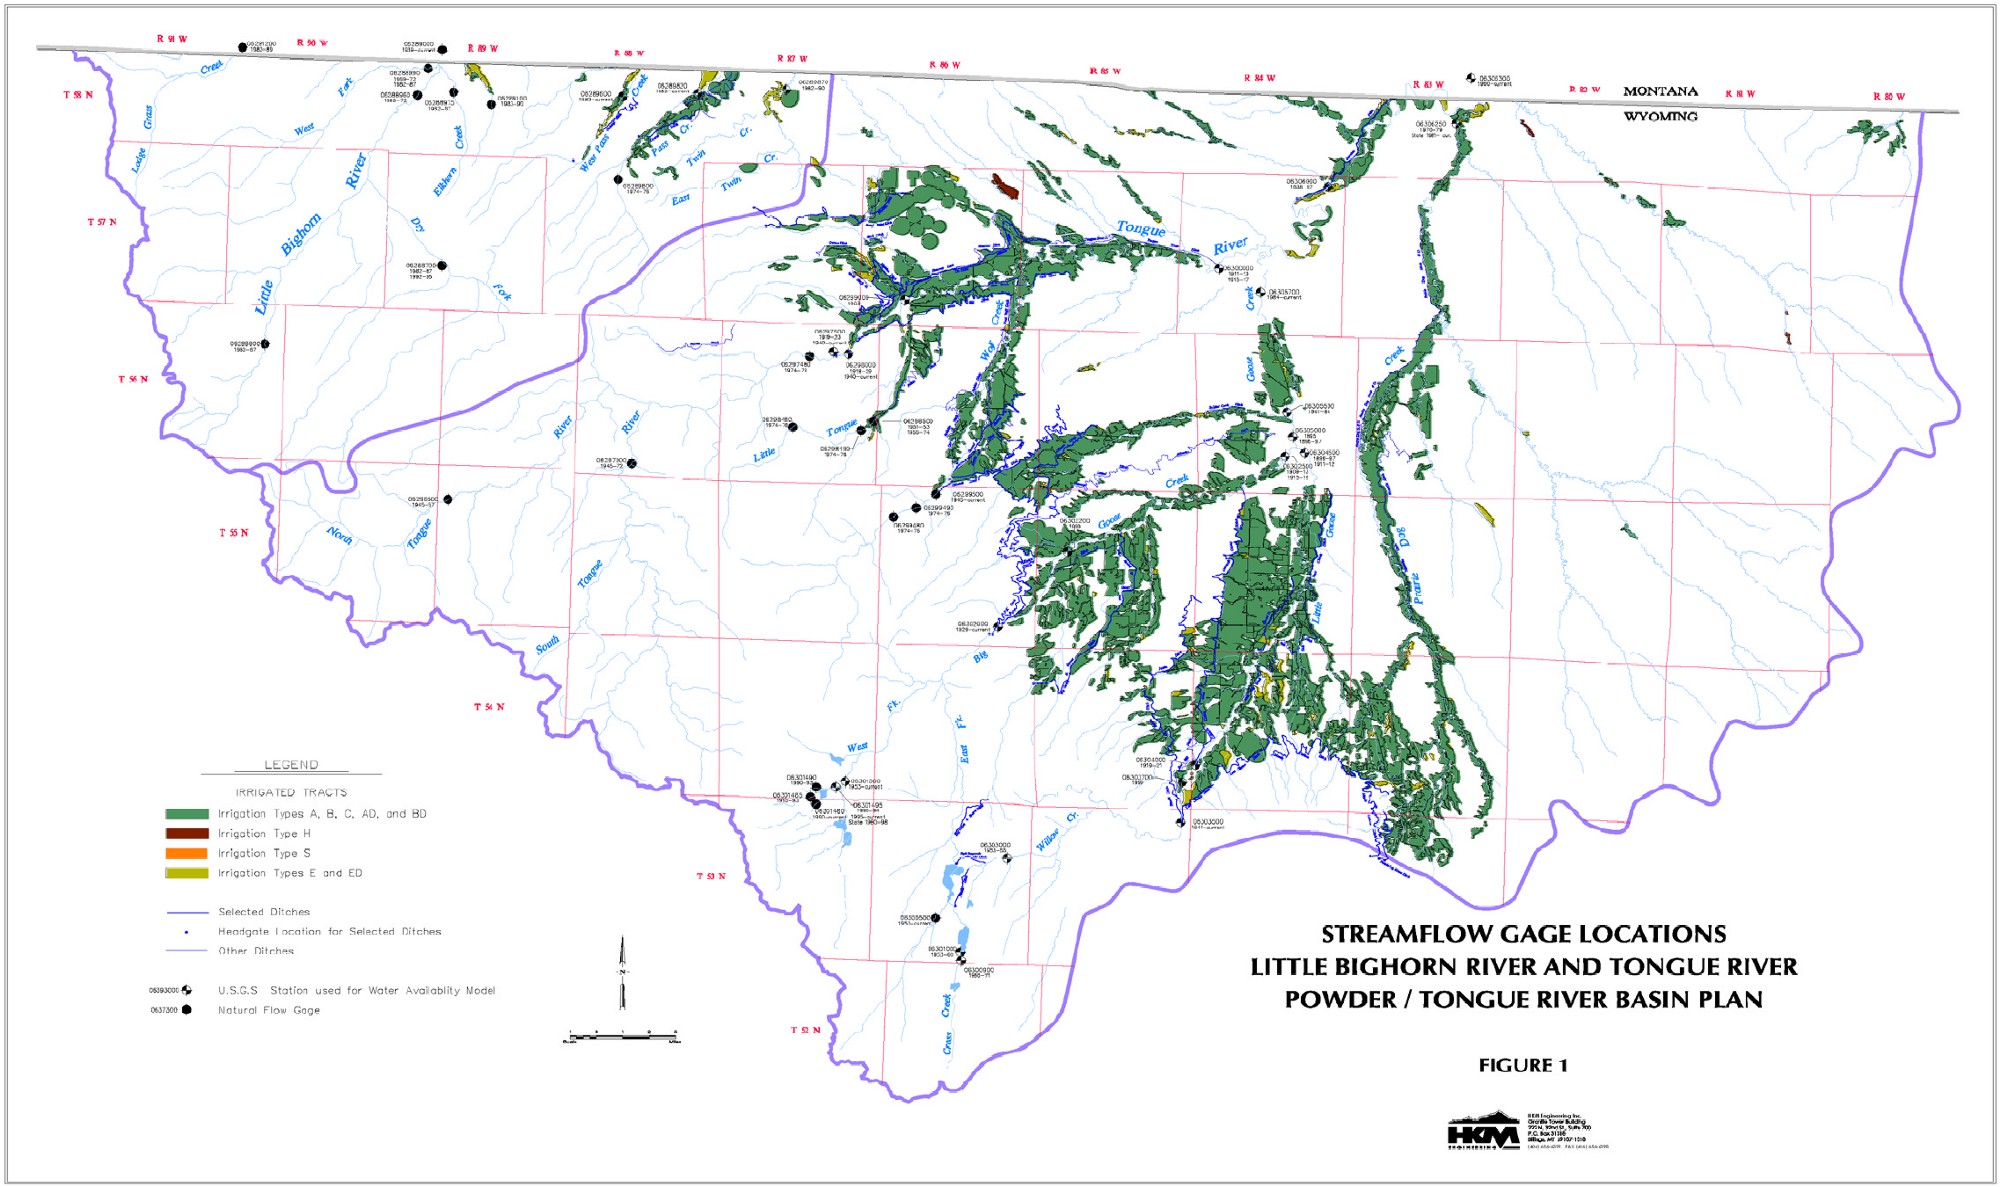 Streamflow Gage Locations, 
Little Bighorn River and Tongue River